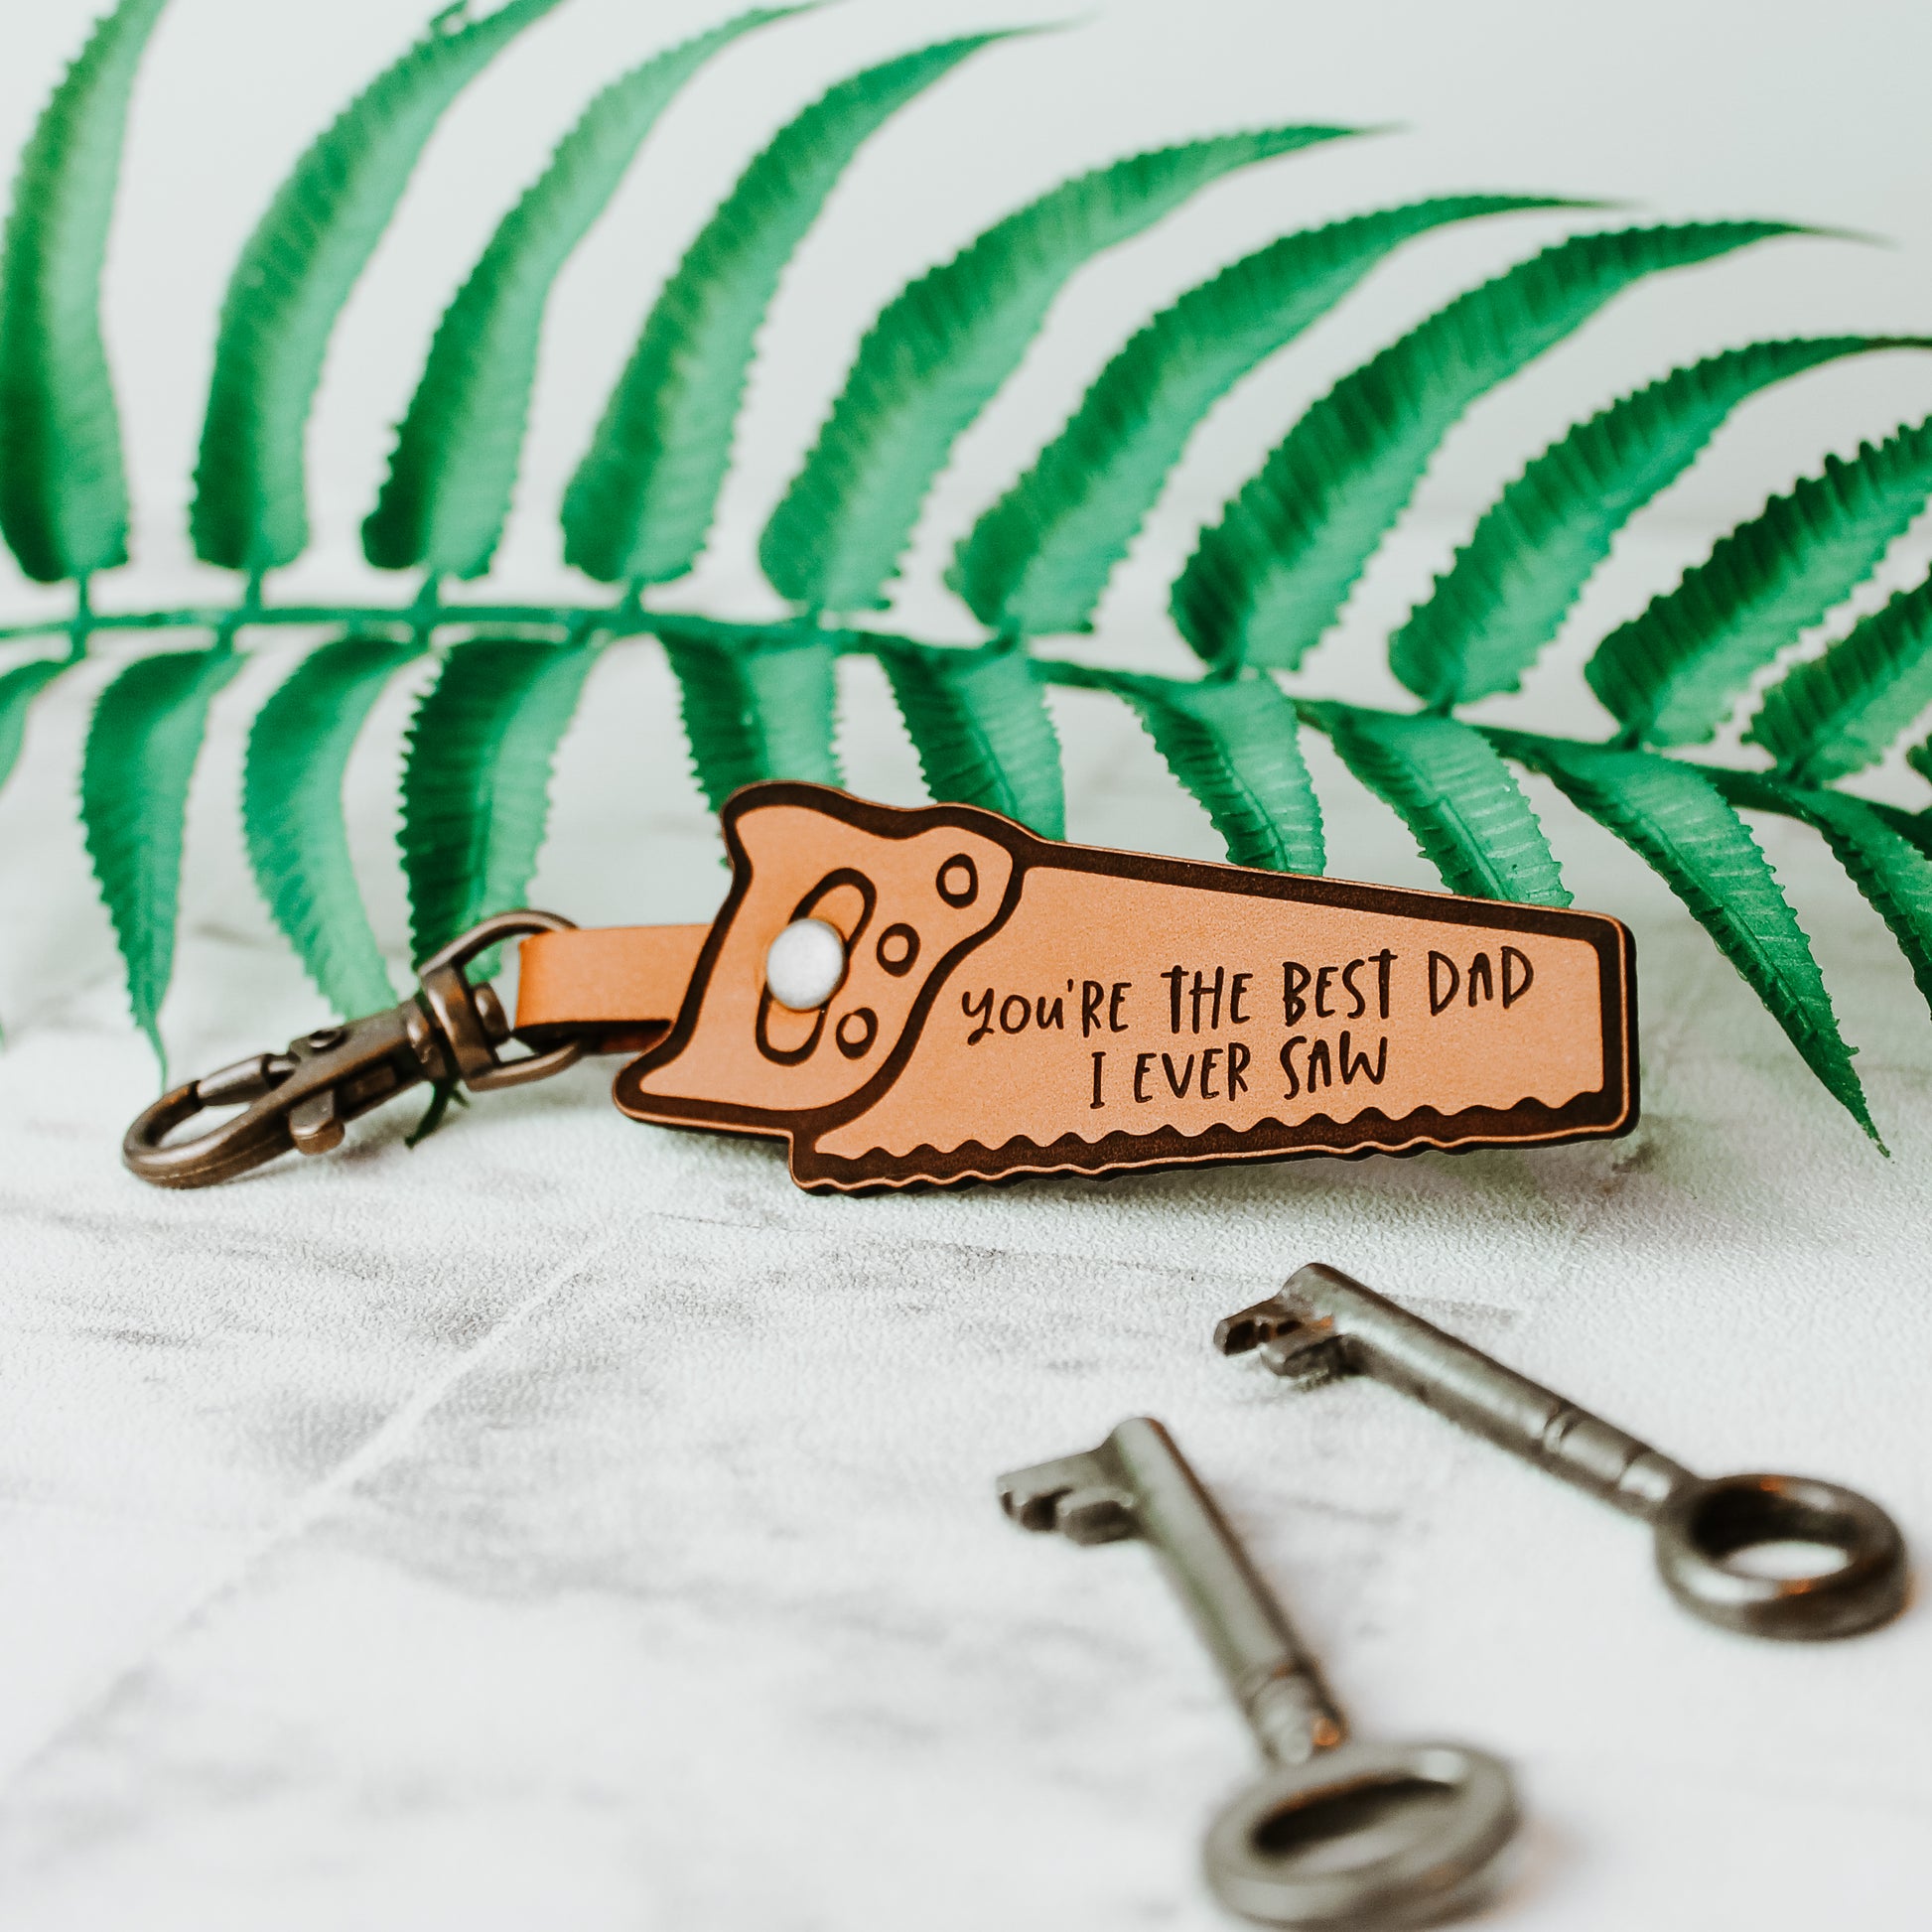 leather saw shaped keyring with, you're the best dad i ever saw, engraved onto it 